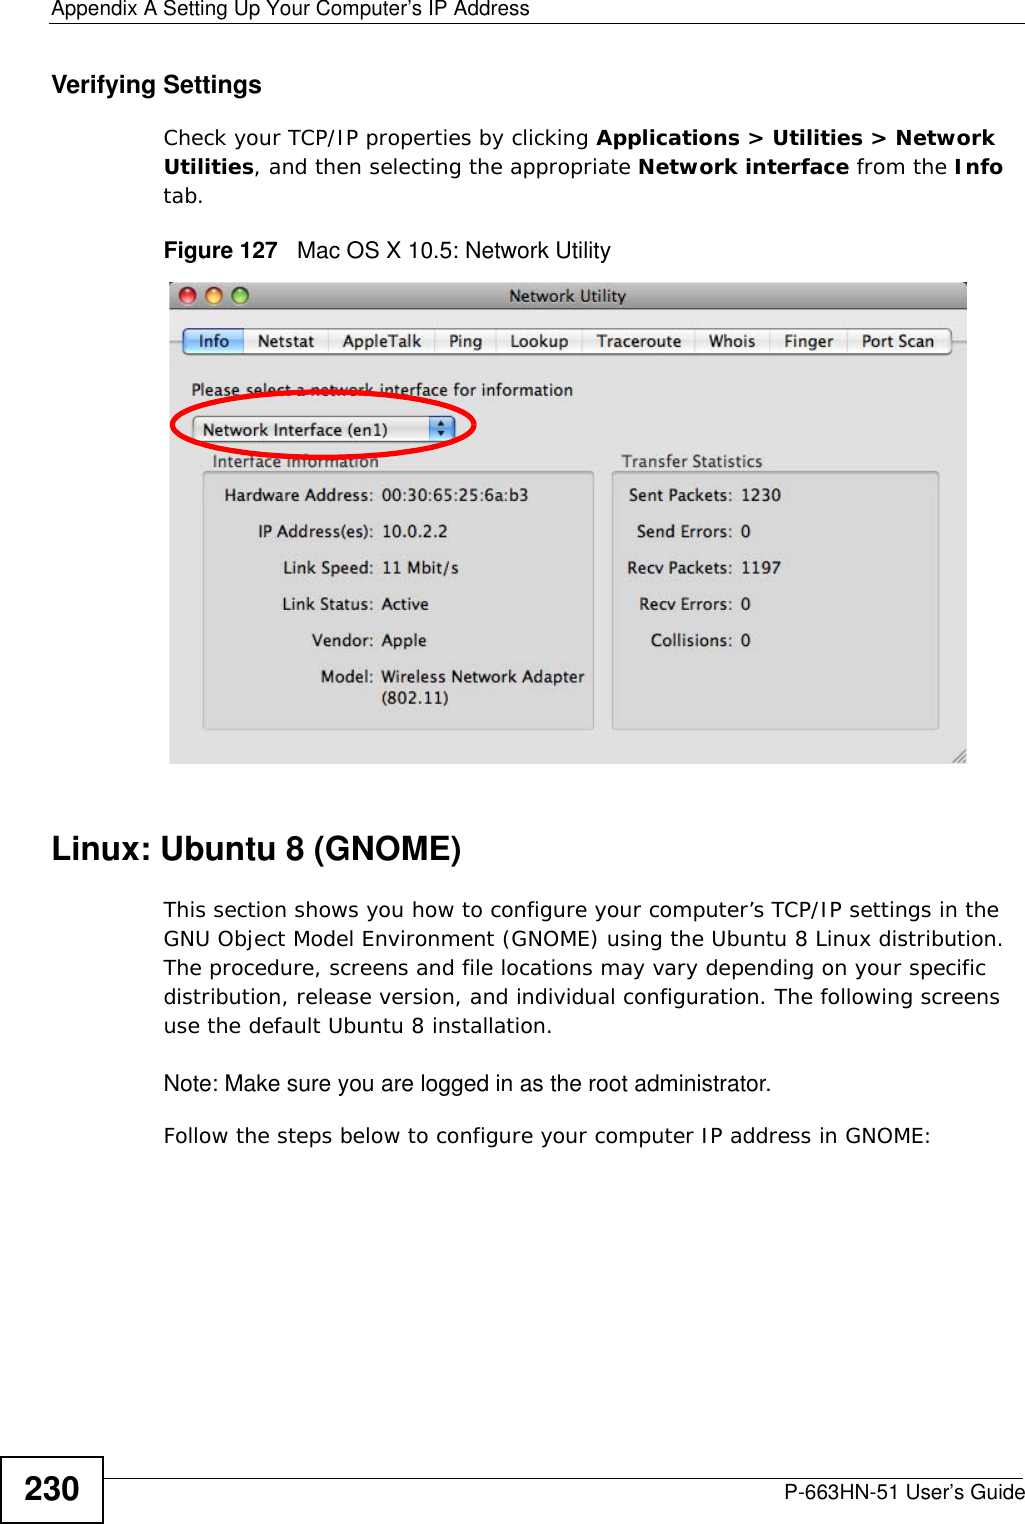 Appendix A Setting Up Your Computer’s IP AddressP-663HN-51 User’s Guide230Verifying SettingsCheck your TCP/IP properties by clicking Applications &gt; Utilities &gt; Network Utilities, and then selecting the appropriate Network interface from the Info tab.Figure 127   Mac OS X 10.5: Network UtilityLinux: Ubuntu 8 (GNOME)This section shows you how to configure your computer’s TCP/IP settings in the GNU Object Model Environment (GNOME) using the Ubuntu 8 Linux distribution. The procedure, screens and file locations may vary depending on your specific distribution, release version, and individual configuration. The following screens use the default Ubuntu 8 installation.Note: Make sure you are logged in as the root administrator. Follow the steps below to configure your computer IP address in GNOME: 